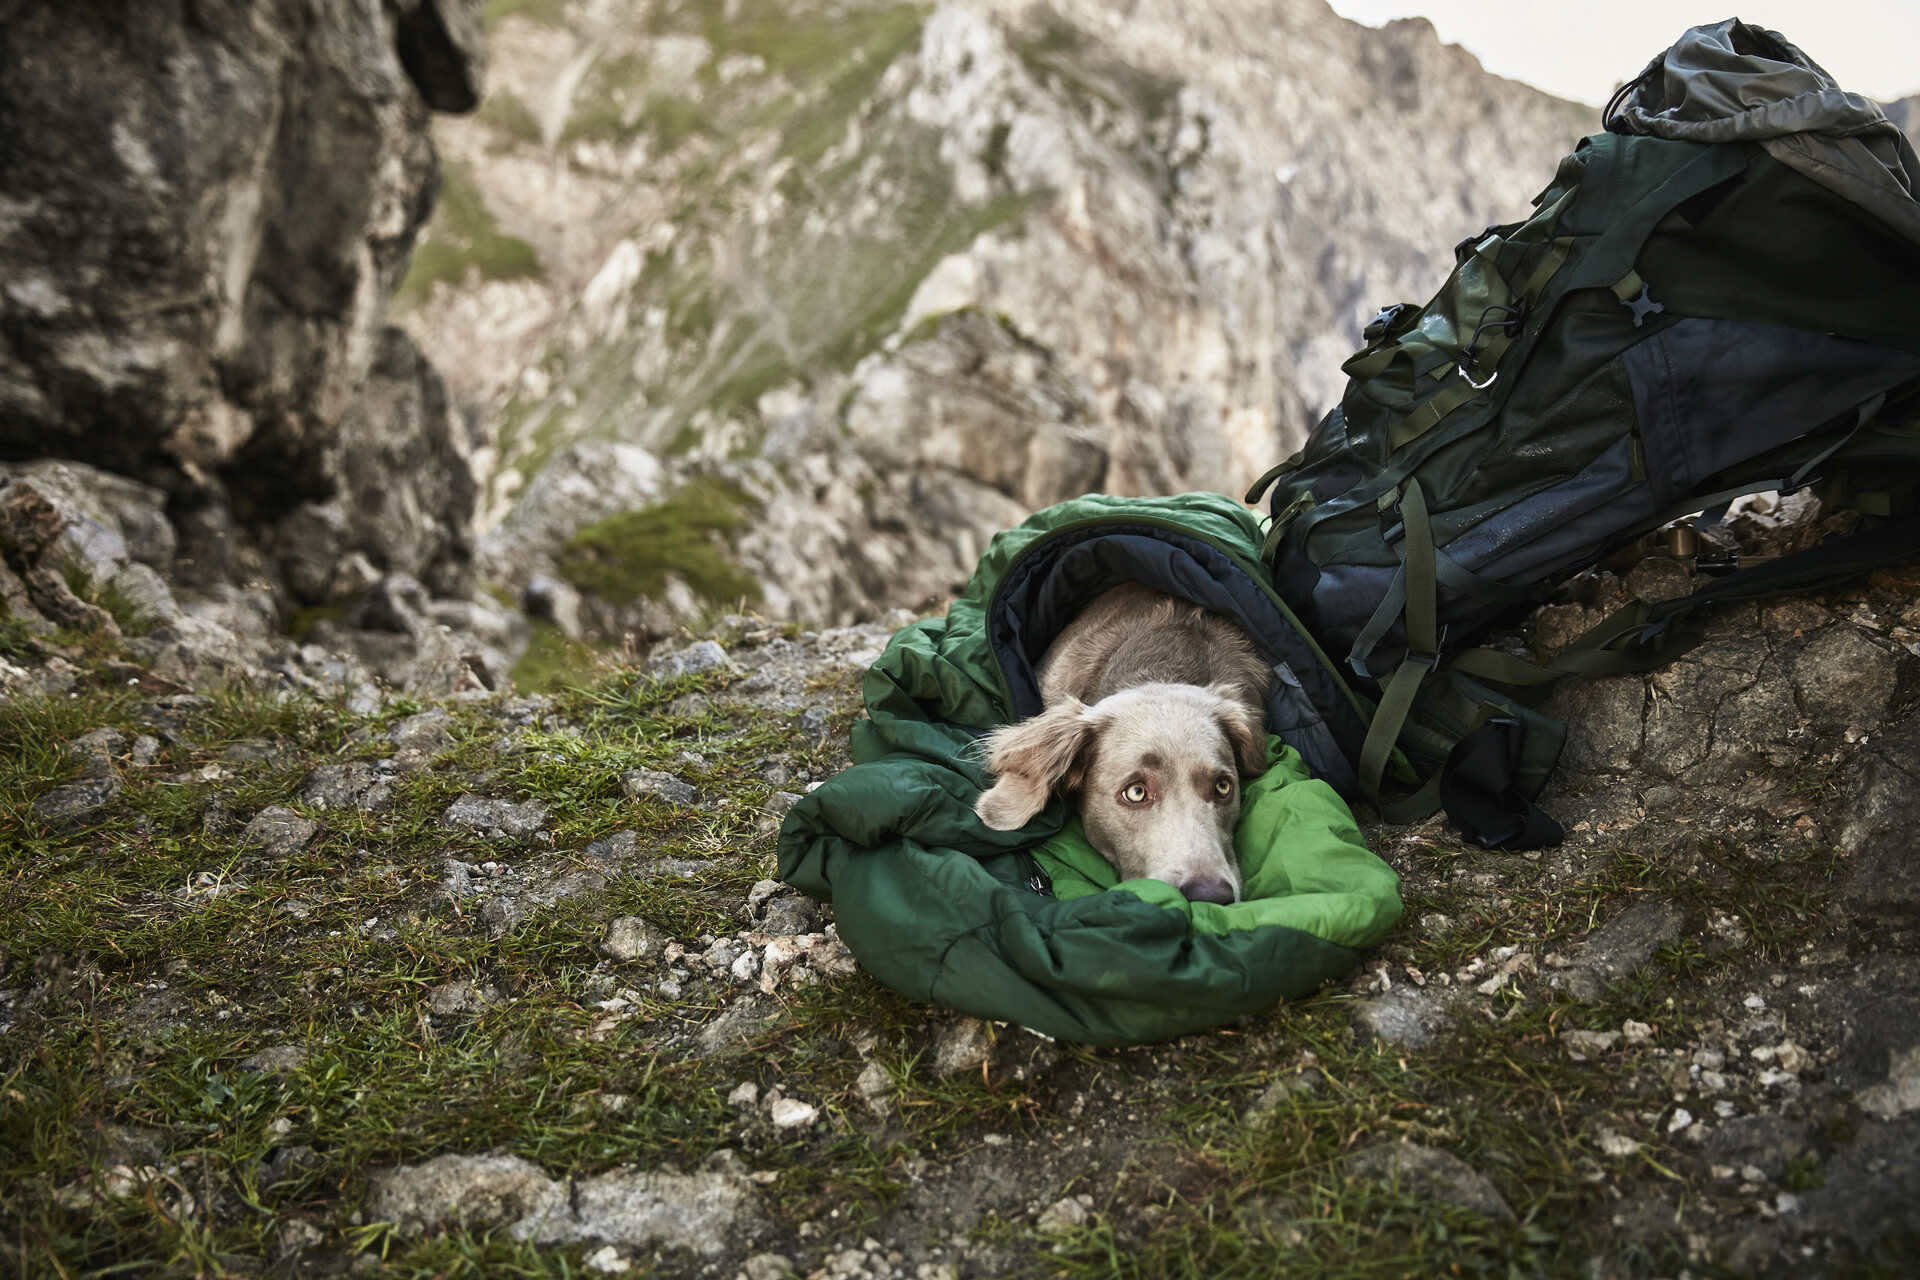 A dog nestled in a sleeping bag in the mountains